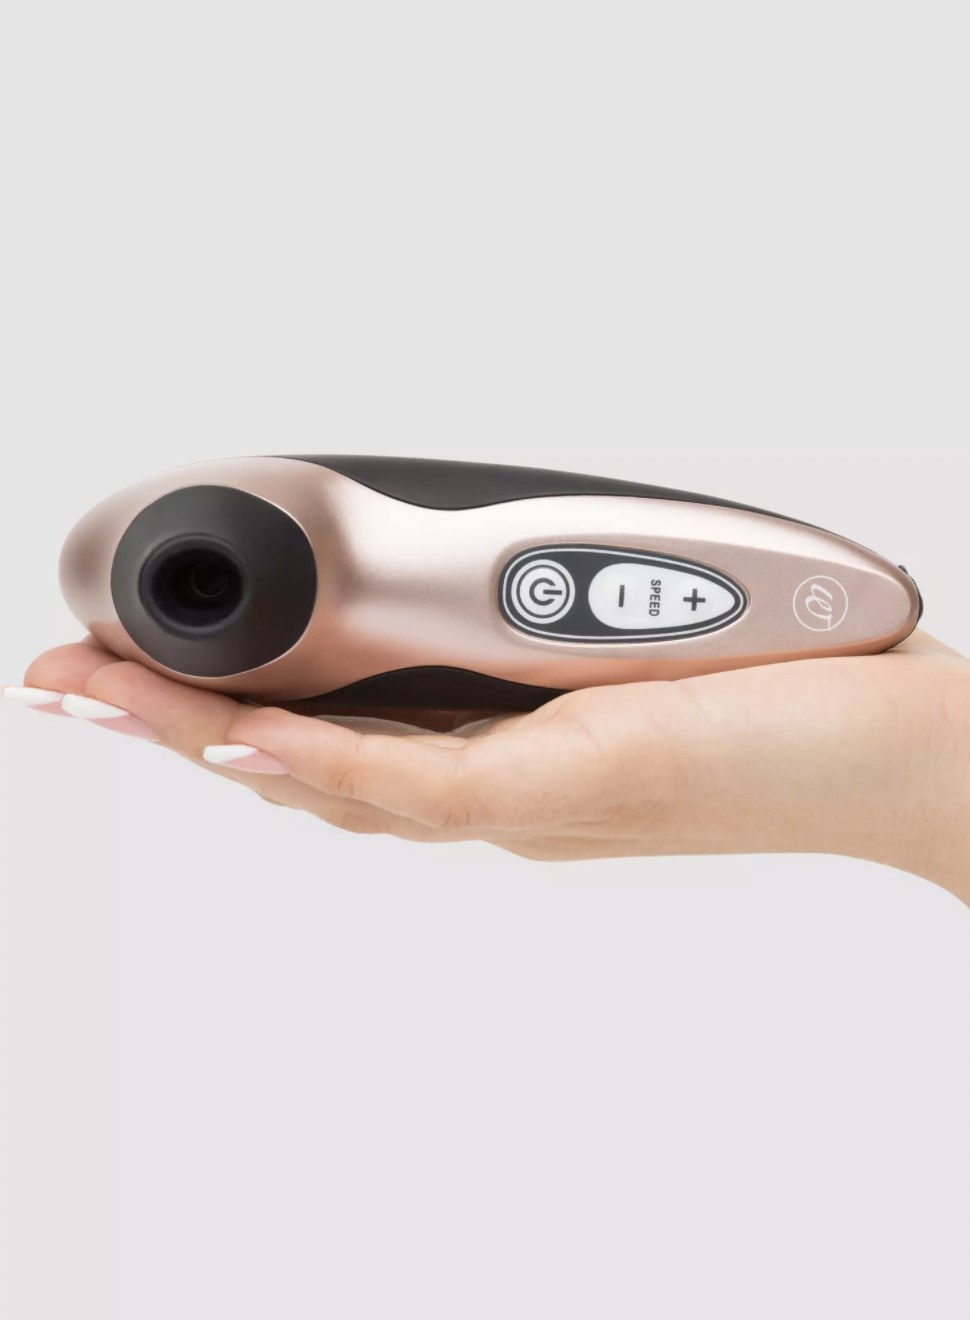 The pink stimulator resting in someone&#x27;s palm, showing the silicon-tipped suction area and control panel, with power button and - and + controls for speed